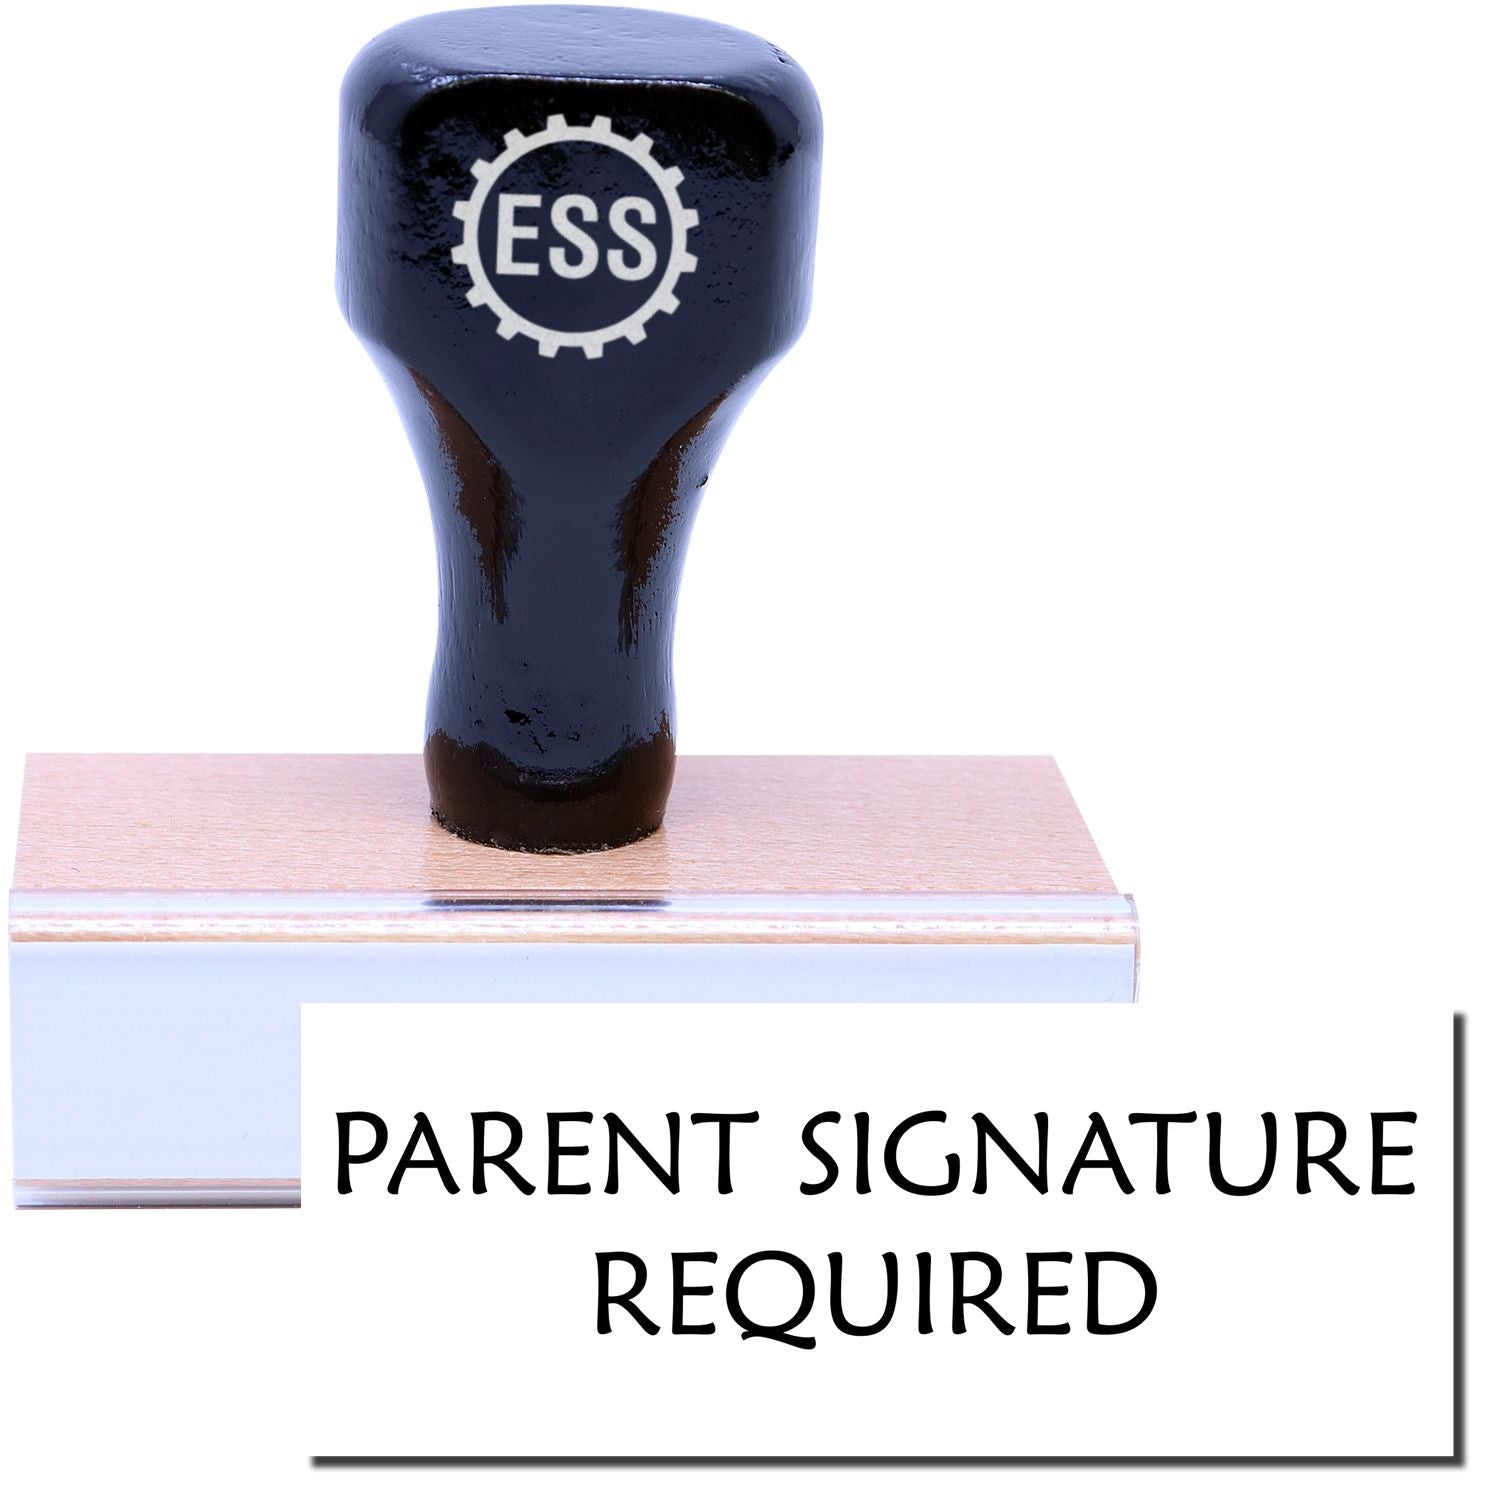 A stock office rubber stamp with a stamped image showing how the text "PARENT SIGNATURE REQUIRED" is displayed after stamping.